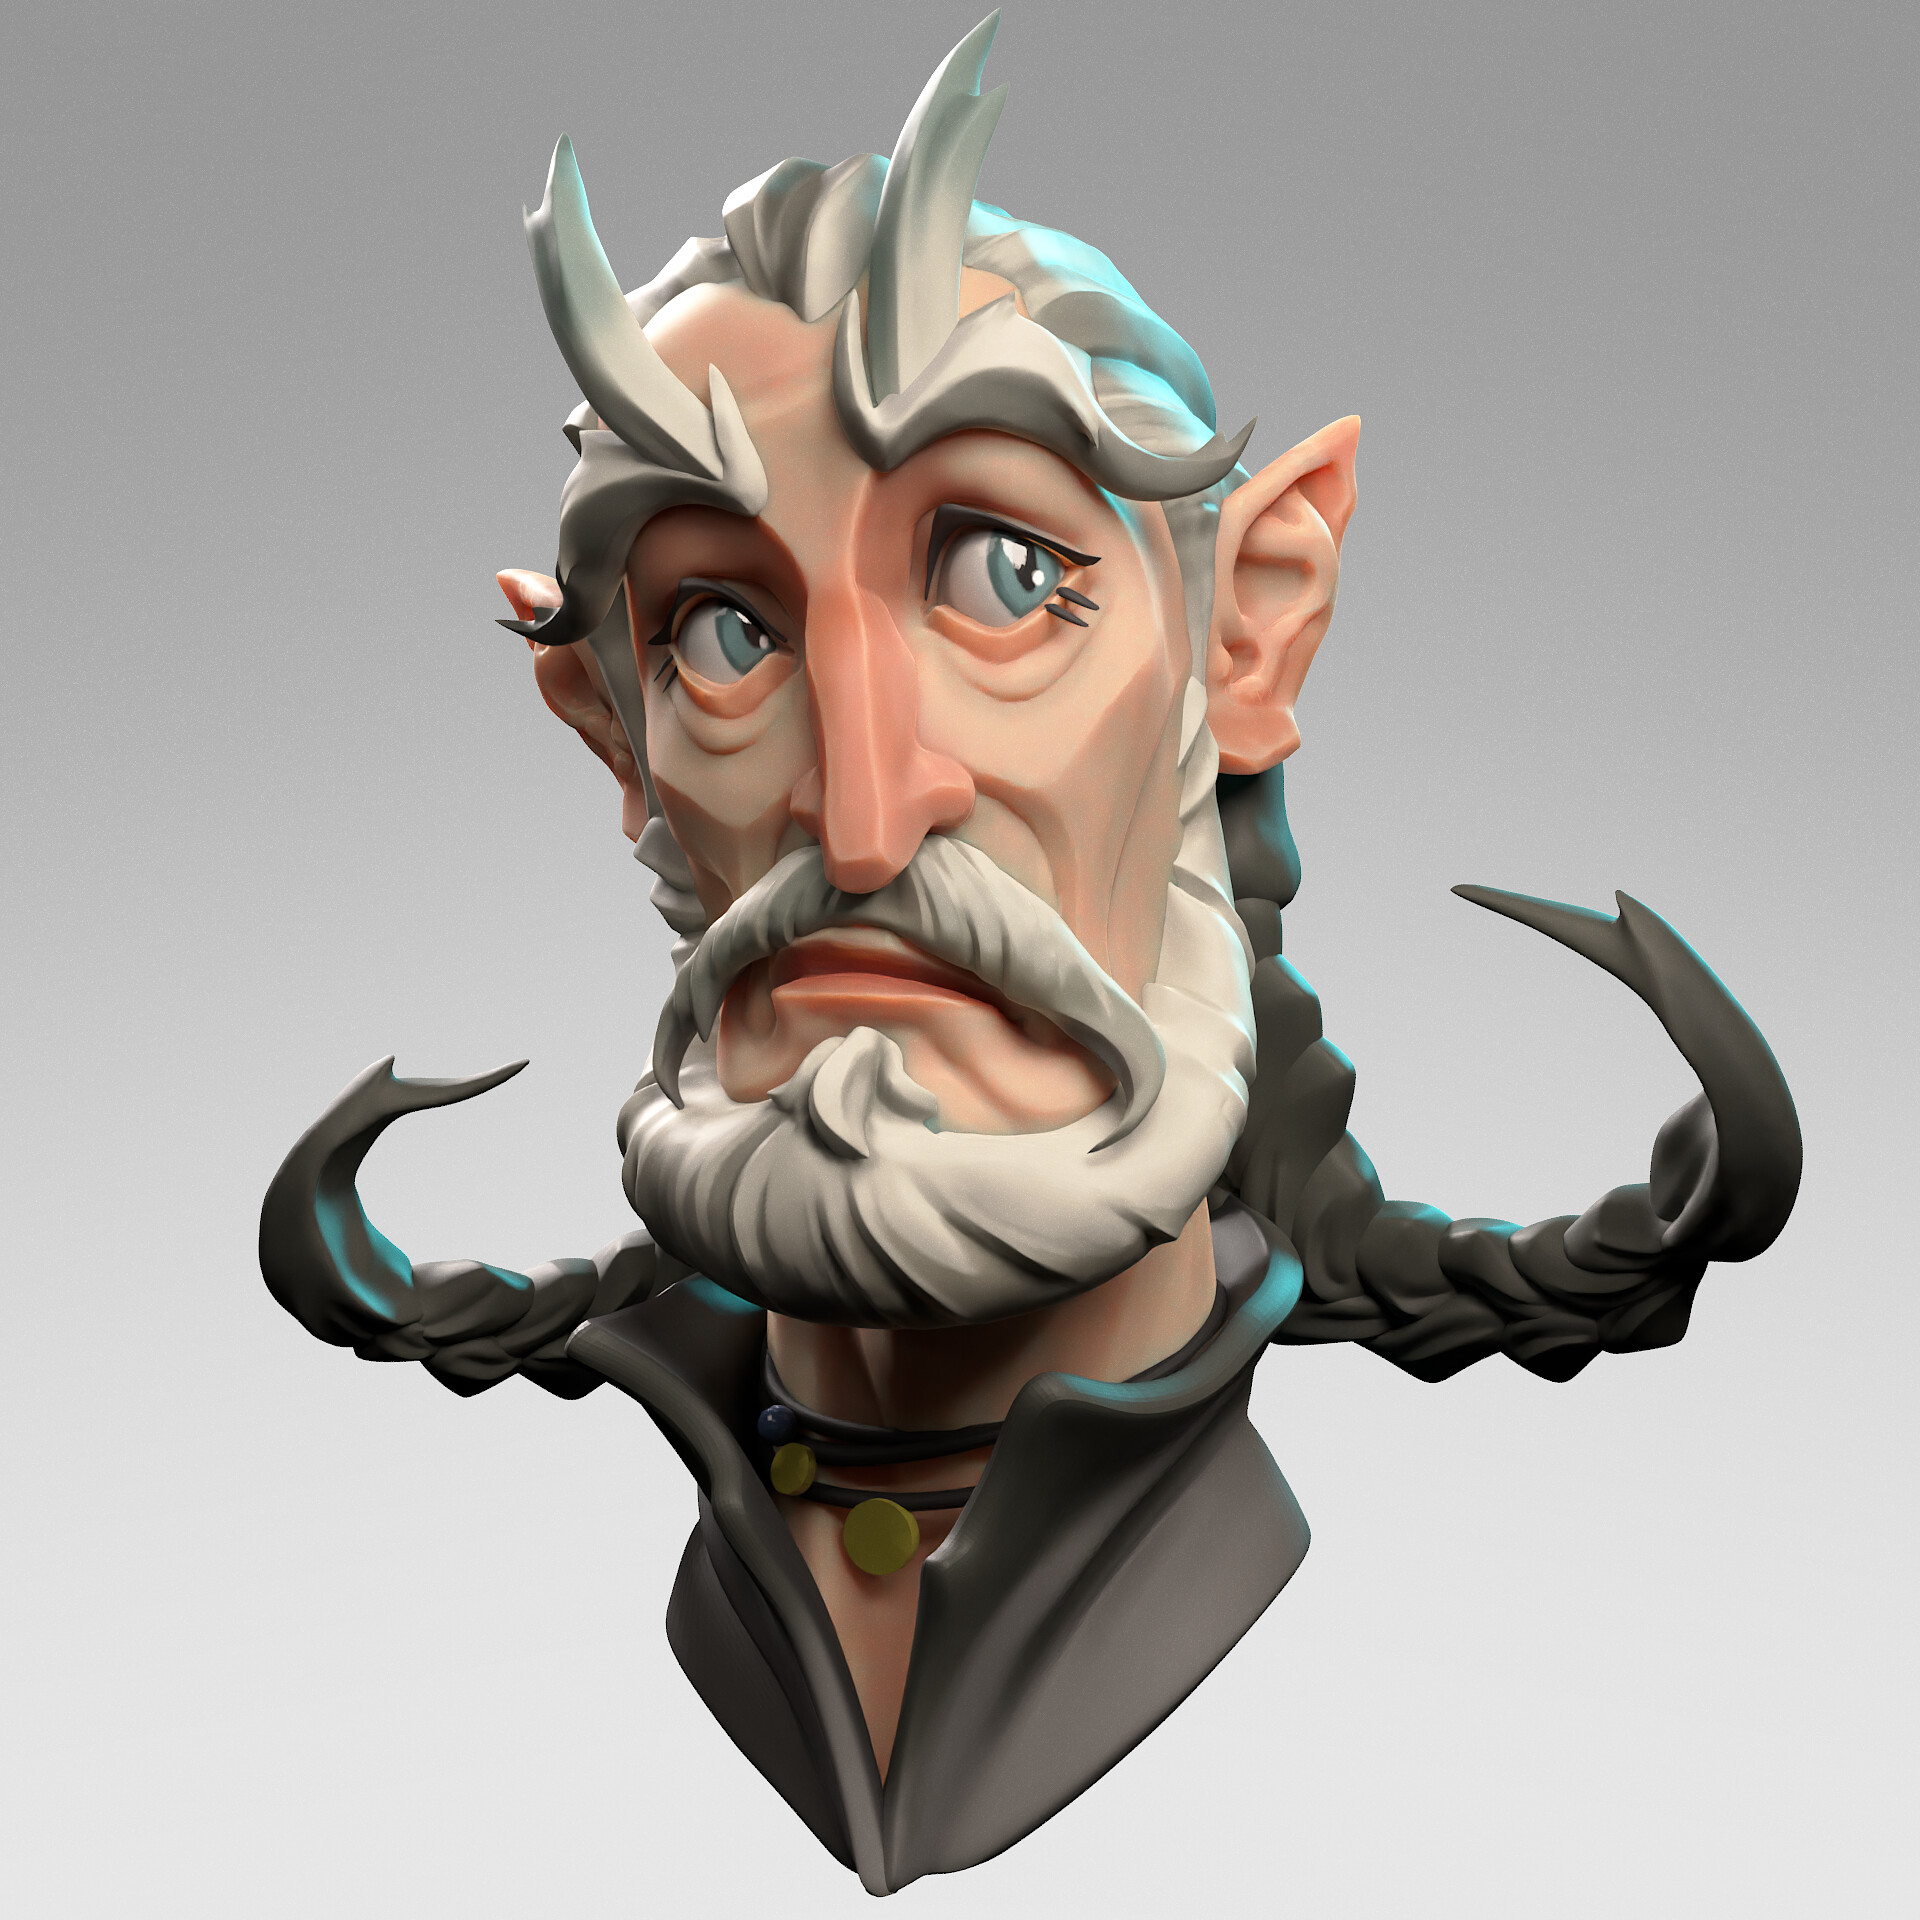 ArtStation - Stylized character sculpting practice Zbrush